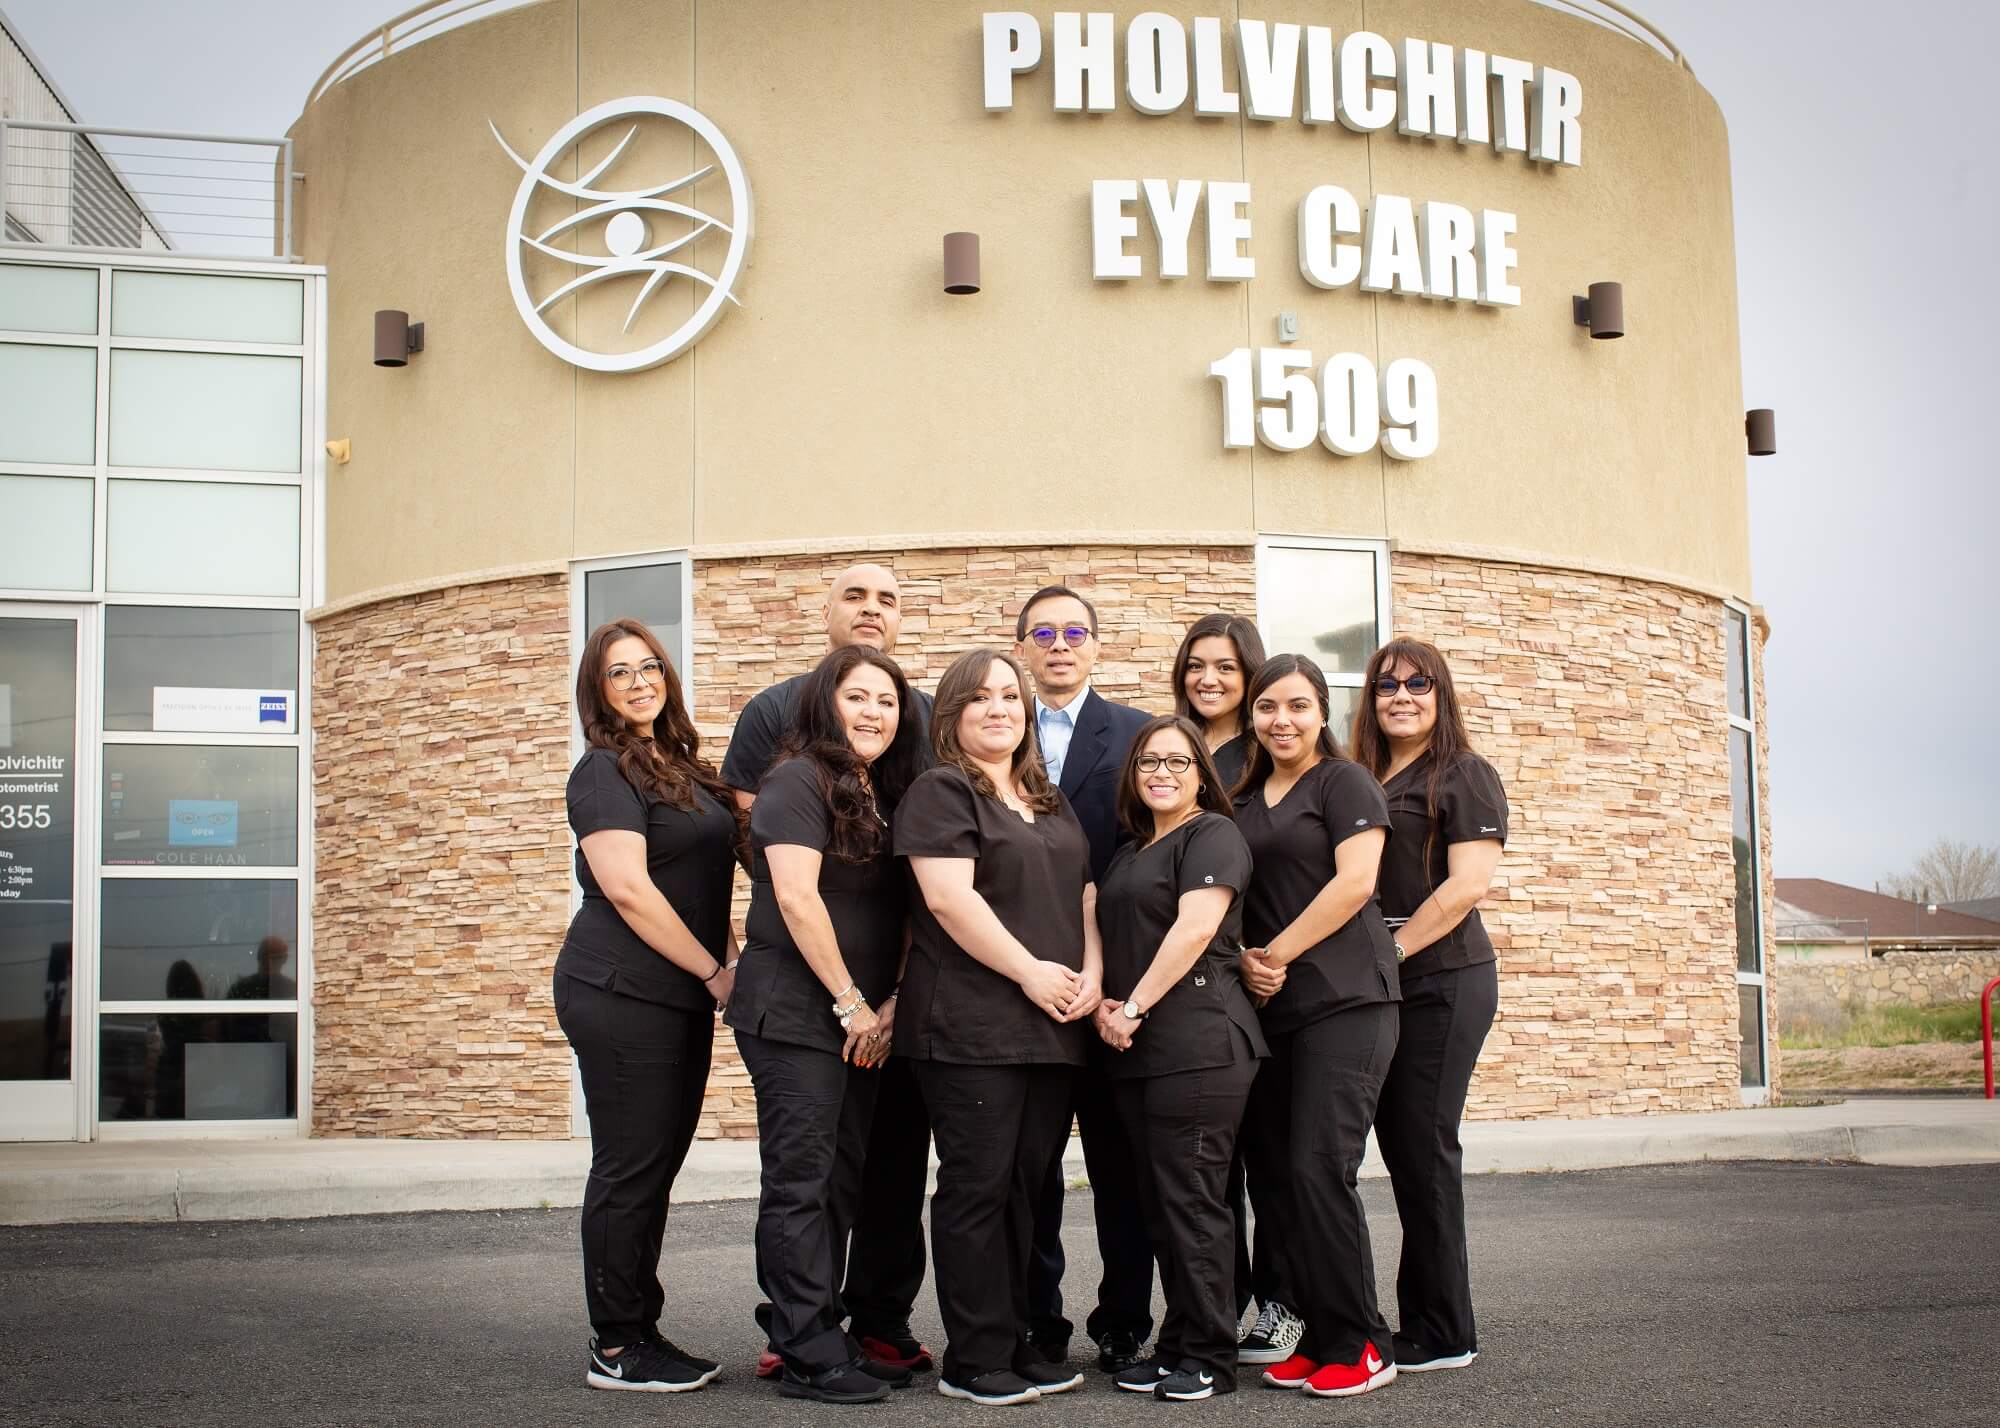 our optometry practice